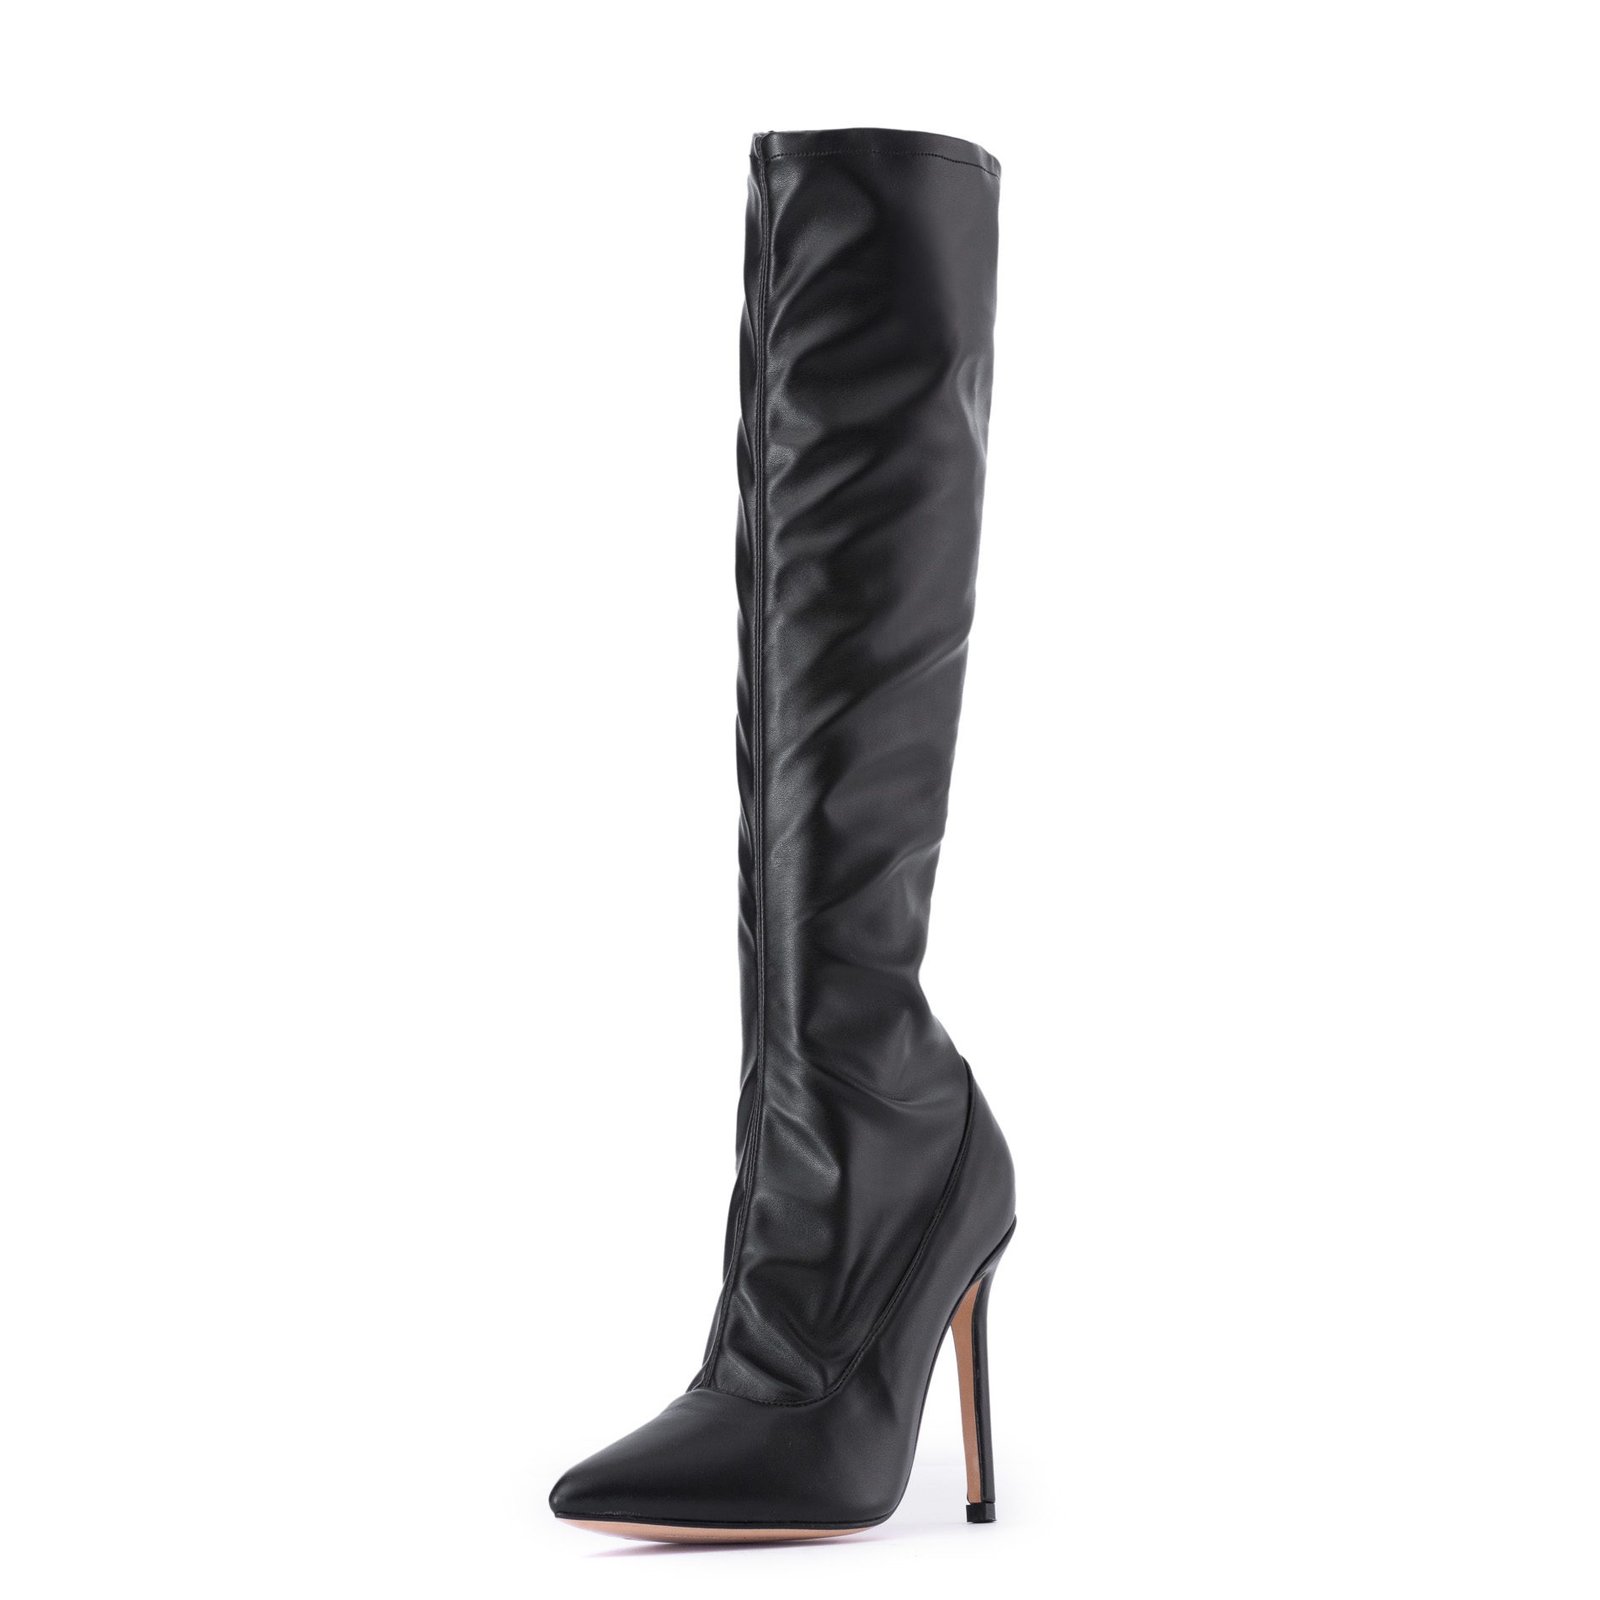 blach boots with heels